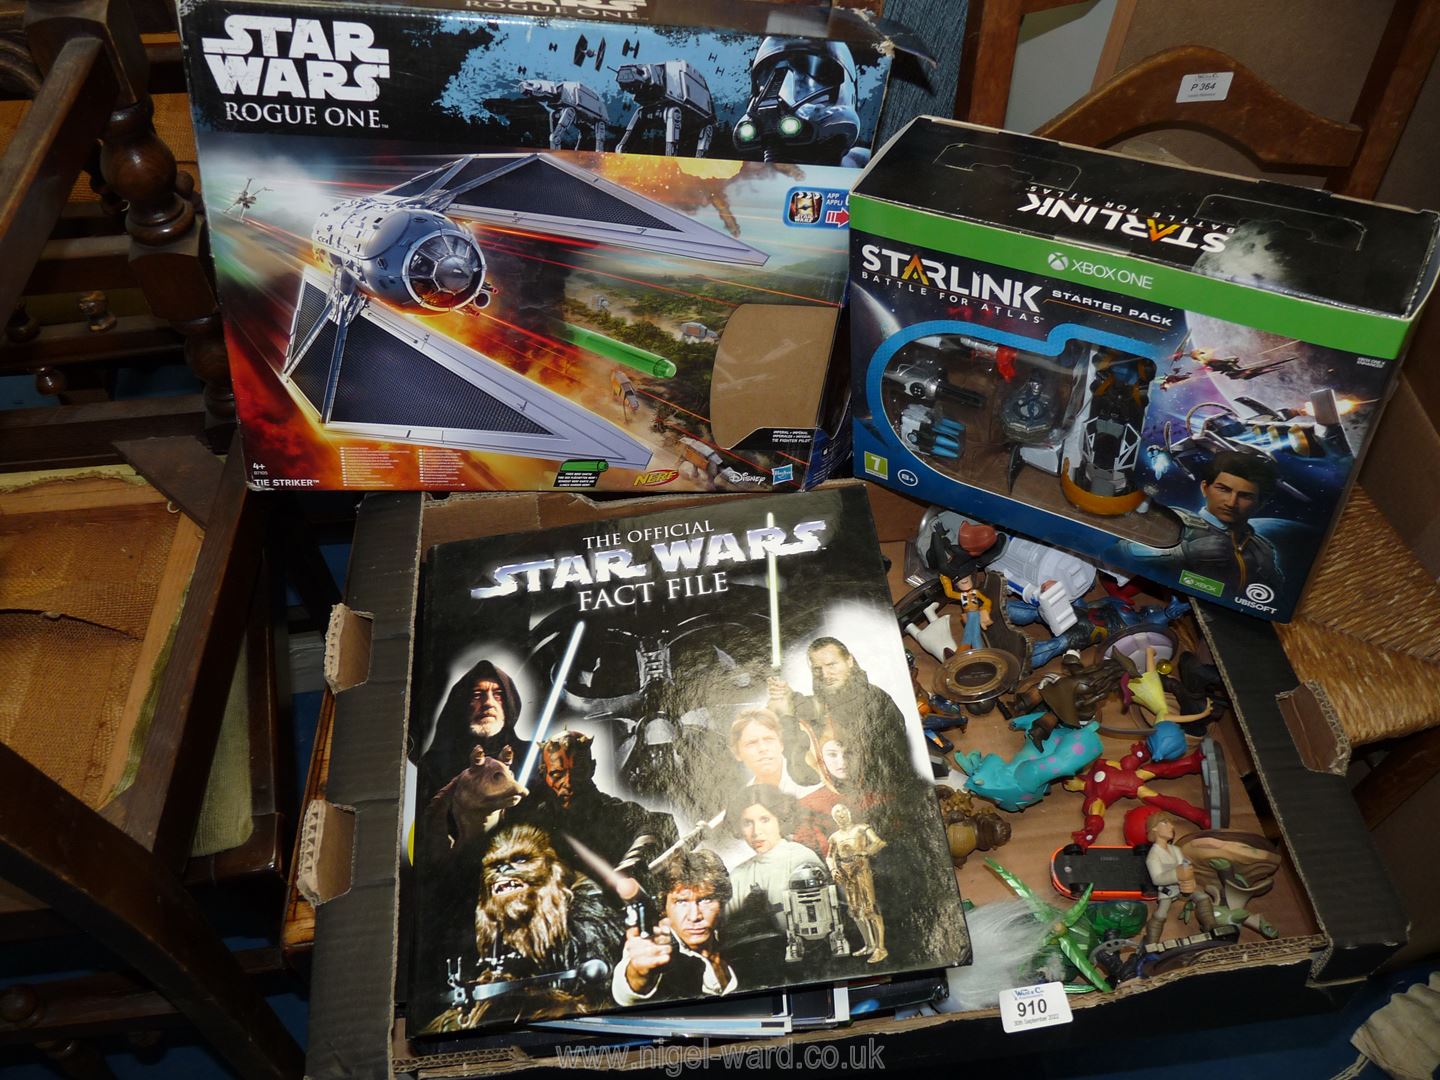 A quantity of children's toys, Star Wars fact file, etc.